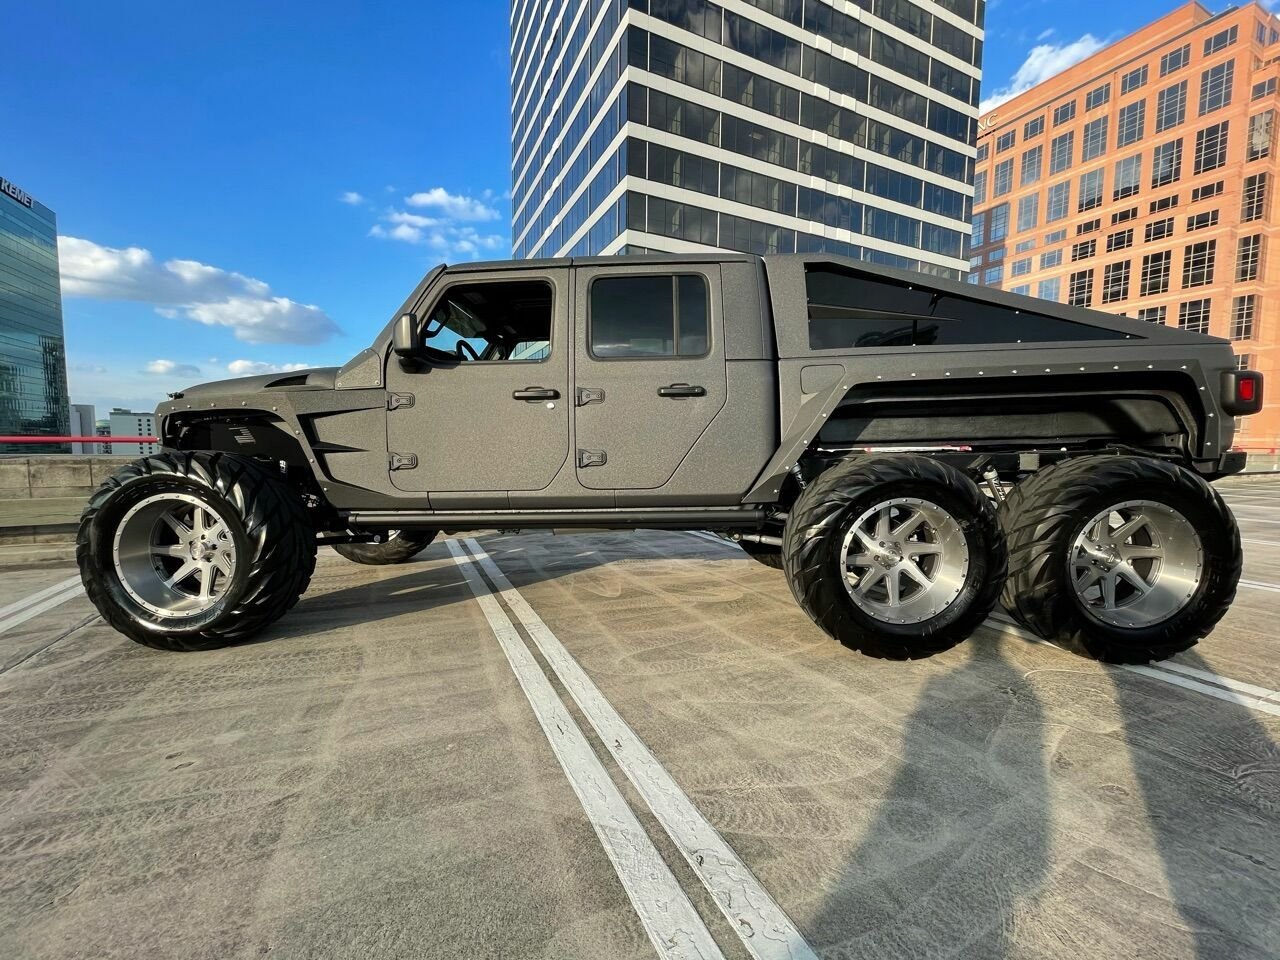 Jeep-Based Apocolypse Hellfire 6×6 Is A Crazy Road Legal Vehicle